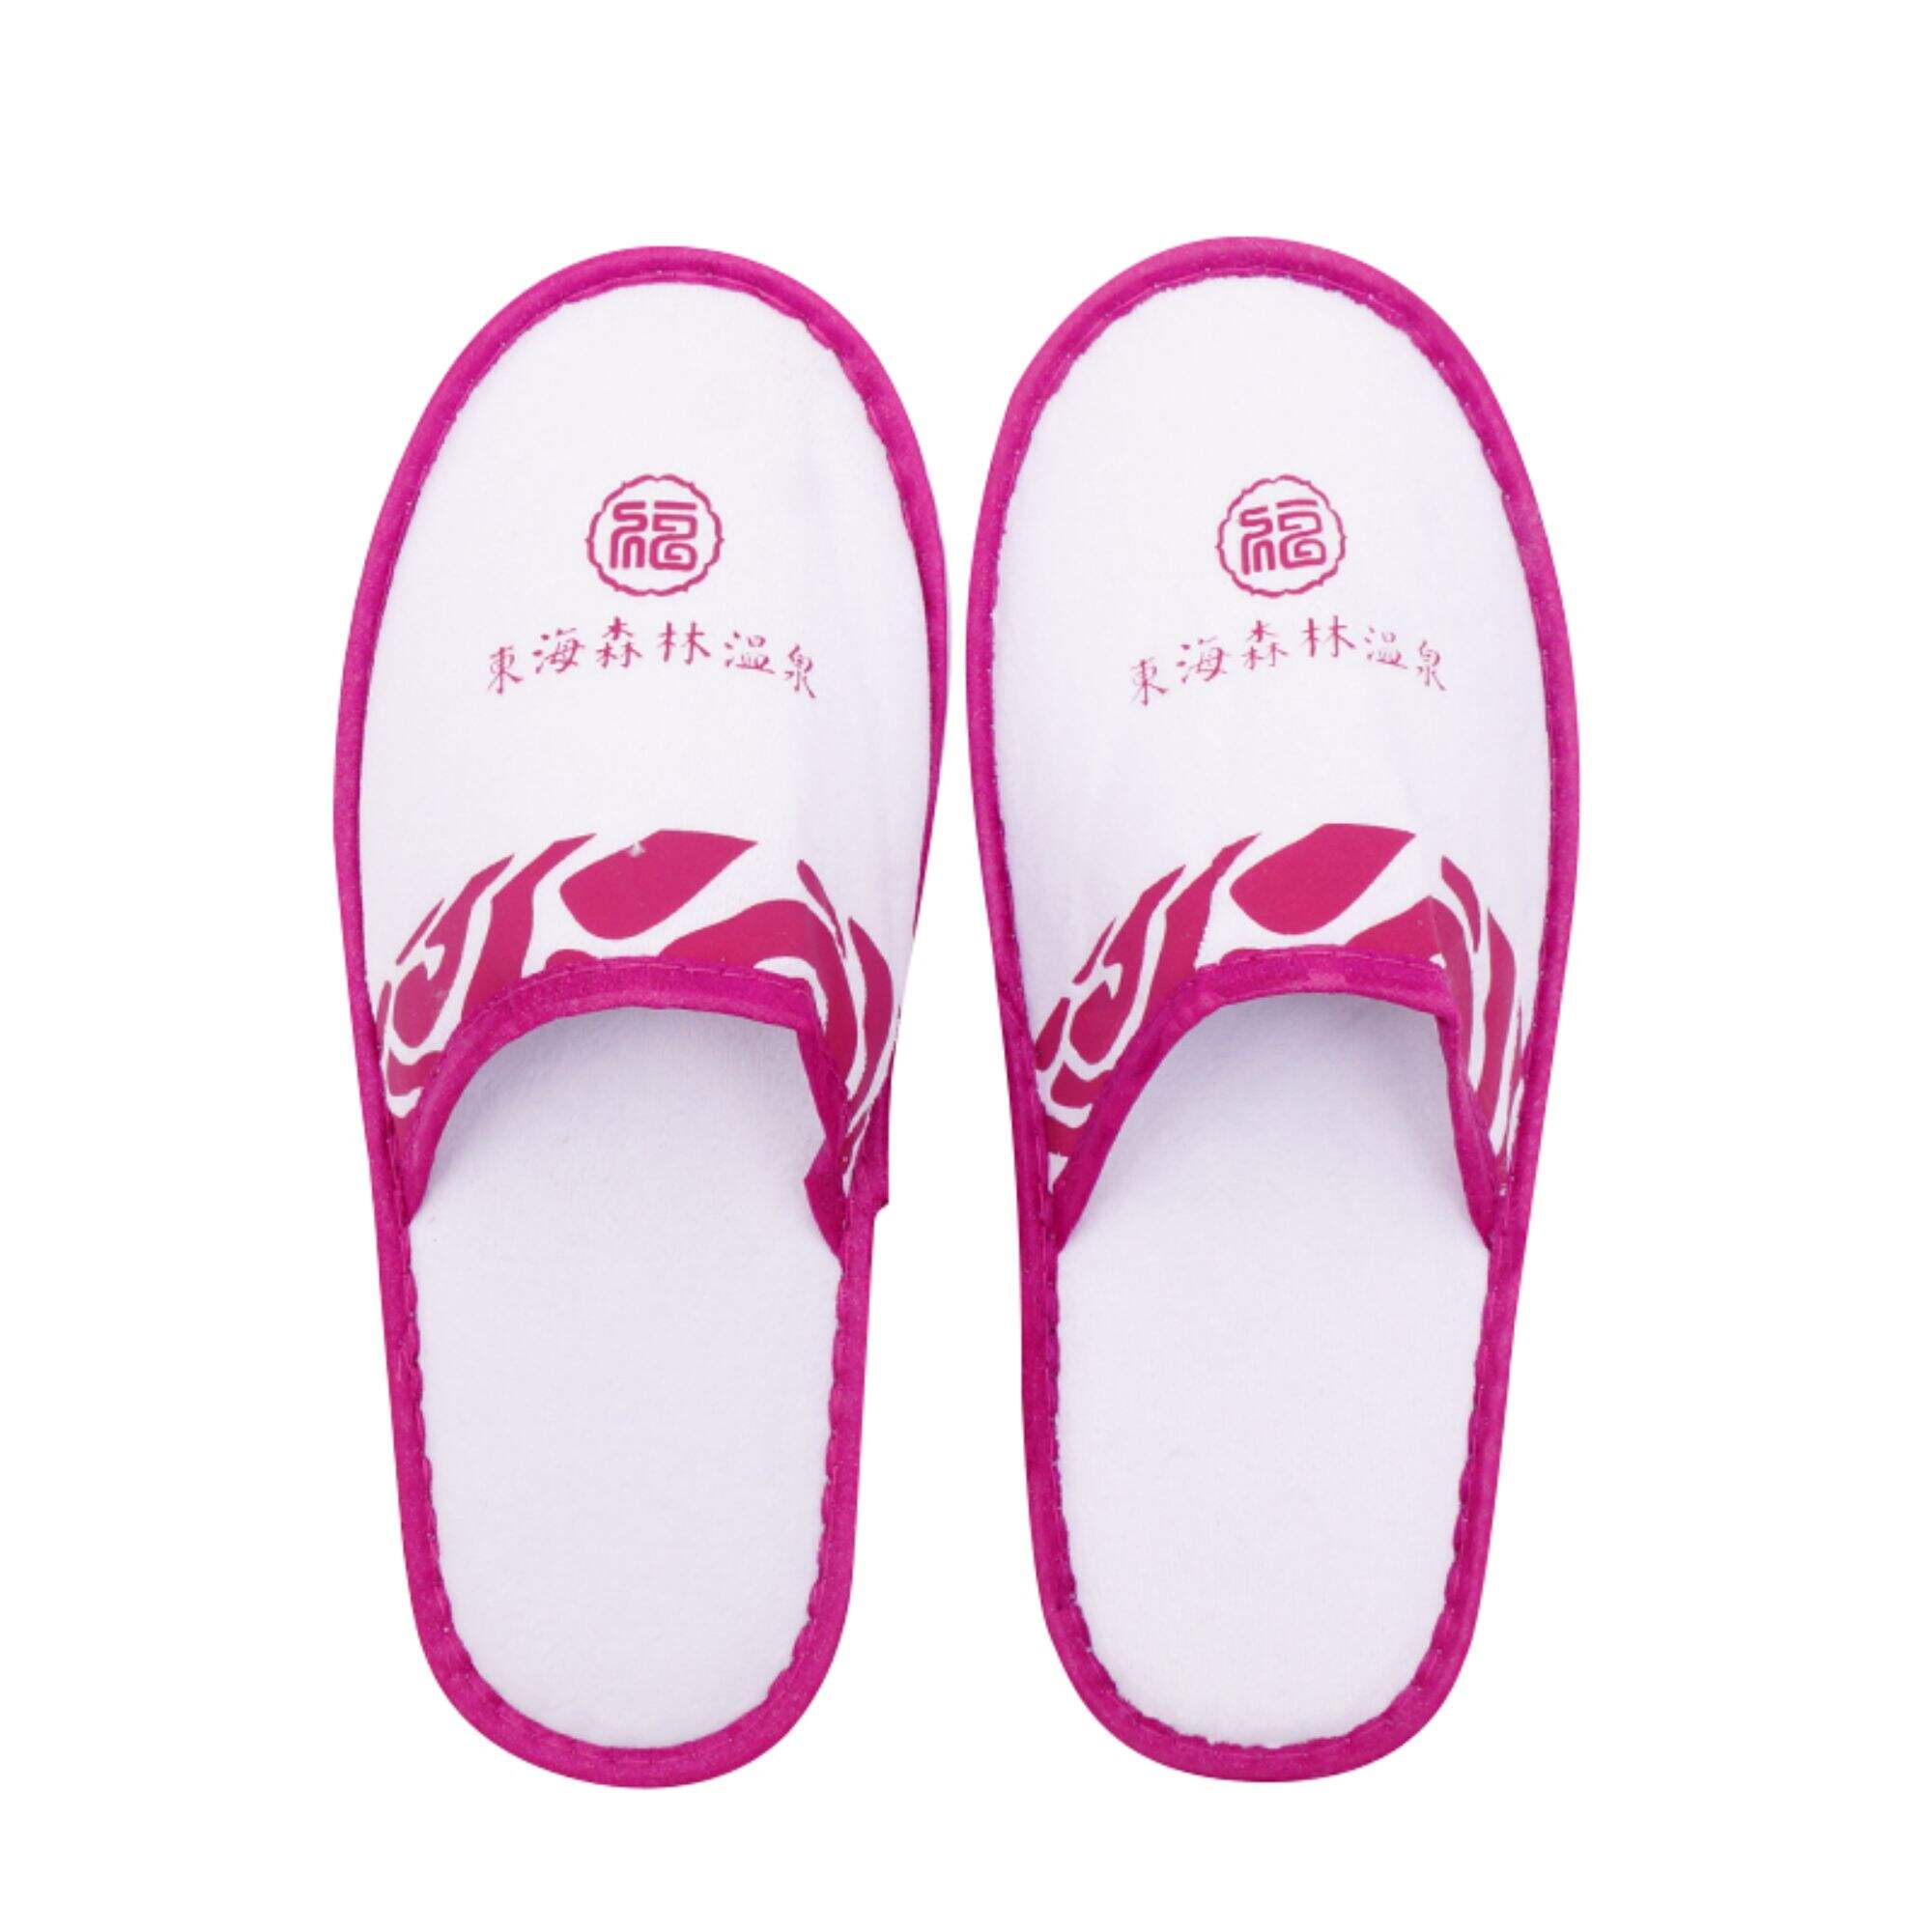 New Design Star Hotel Spa Disposable Slippers Terry Waffle Fabric Hotel Slippers With Logo